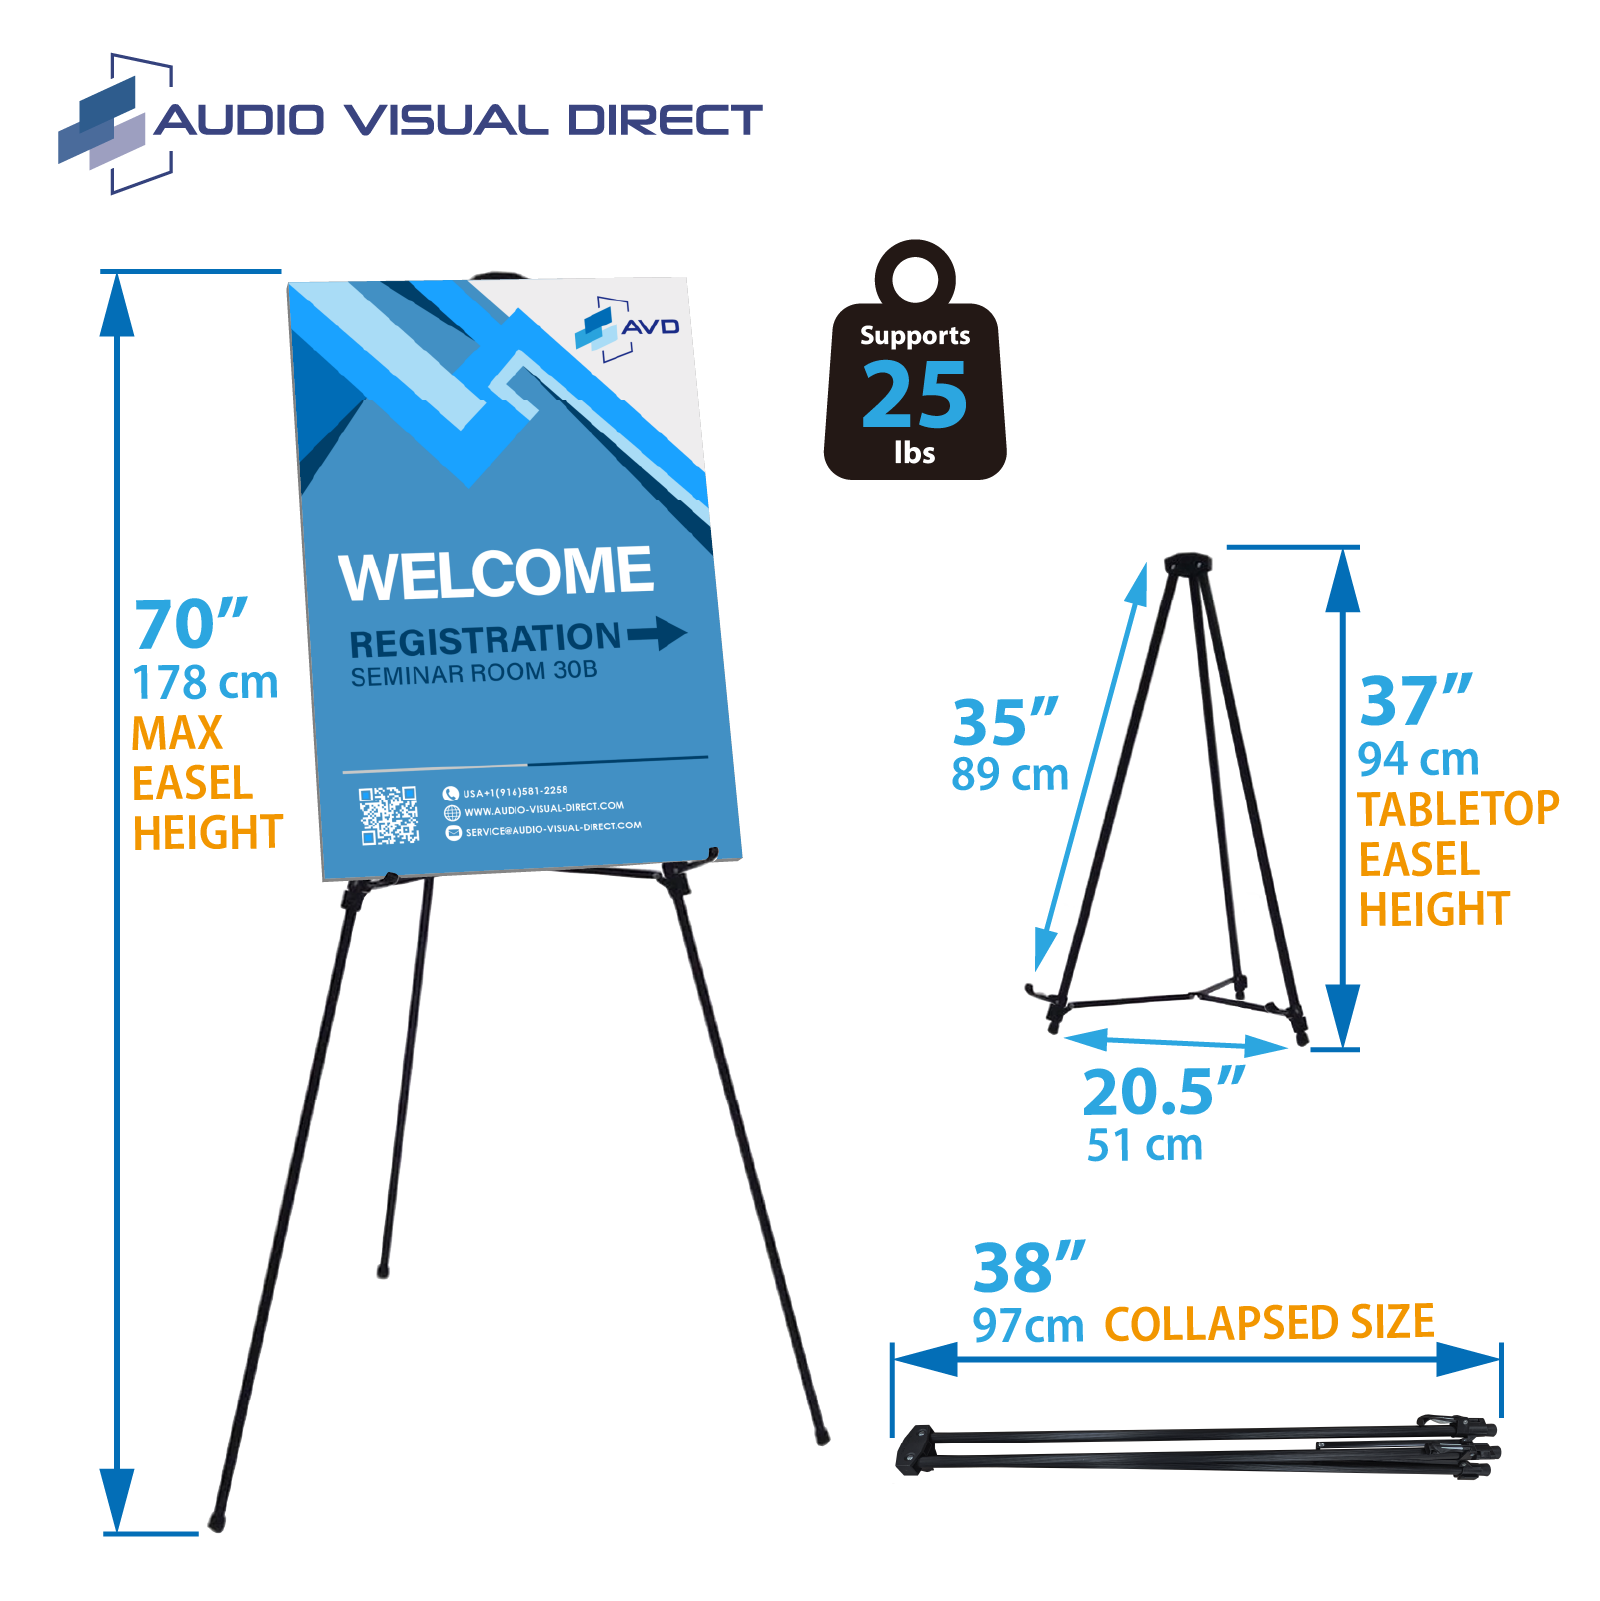 Lightweight Aluminum Telescoping Display Easel, 70 Inches, Black. Height Adjustable with art holders for posters. 